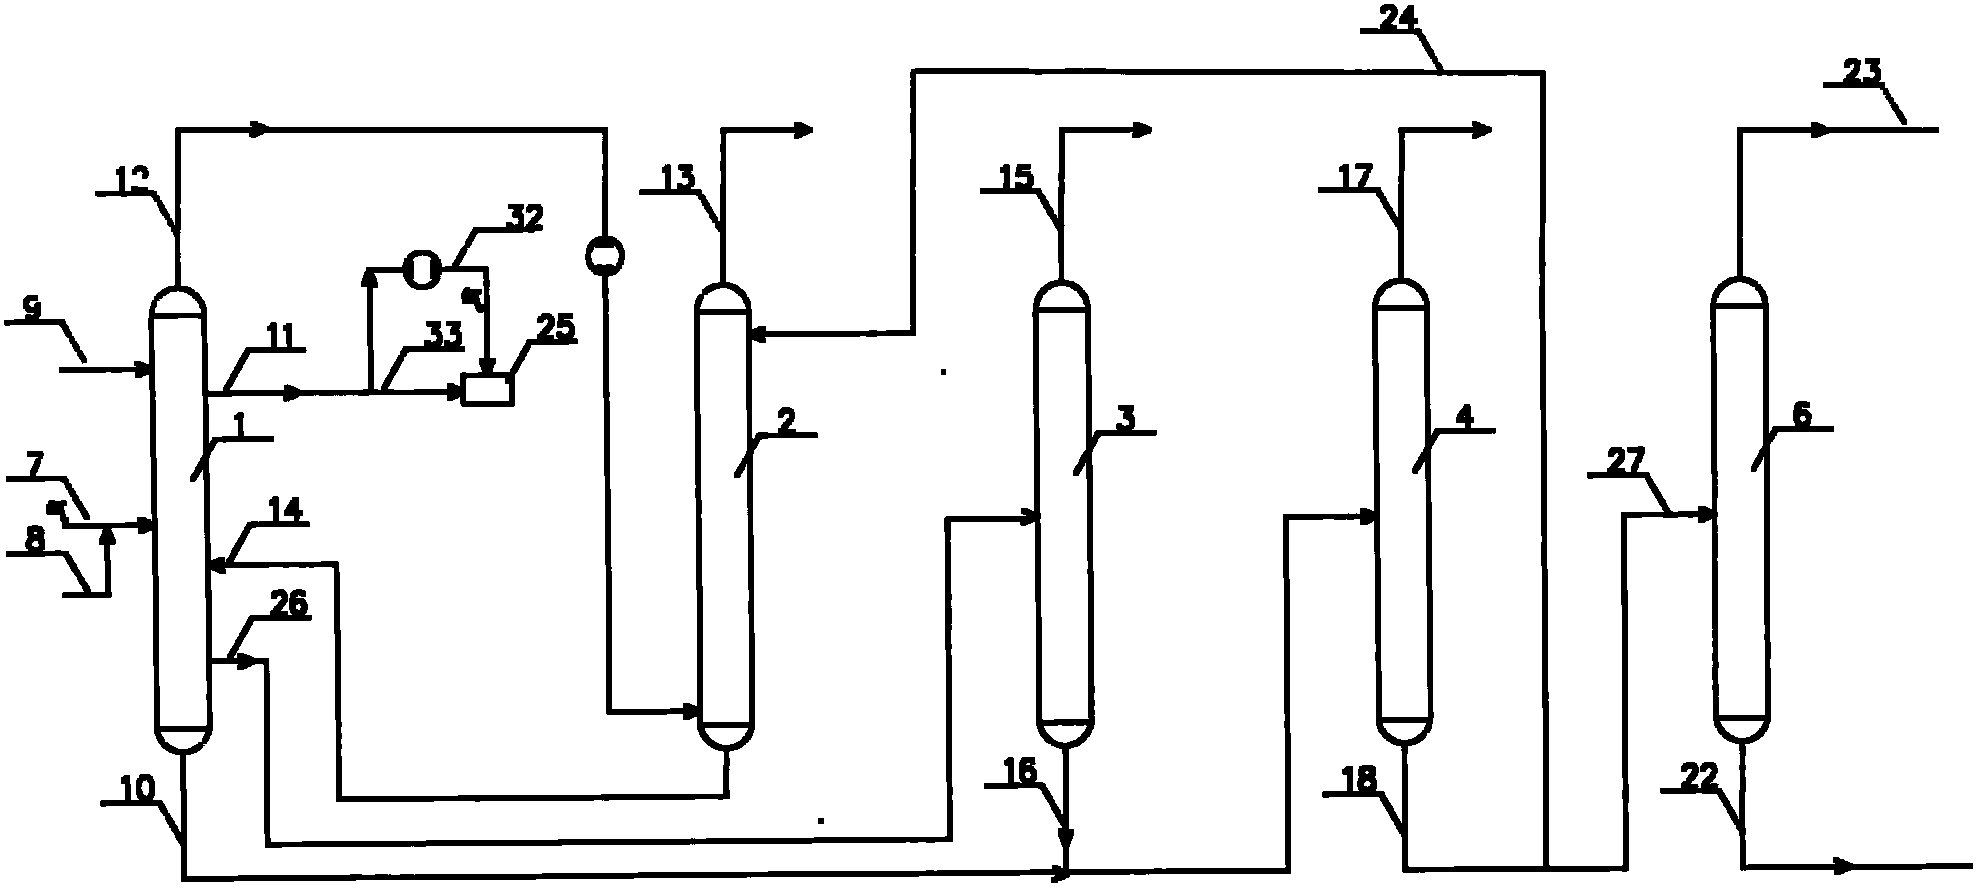 Separation process for producing ethylbenzene and/or propylbenzene product from gas containing ethylene and/or propylene by gas phase process